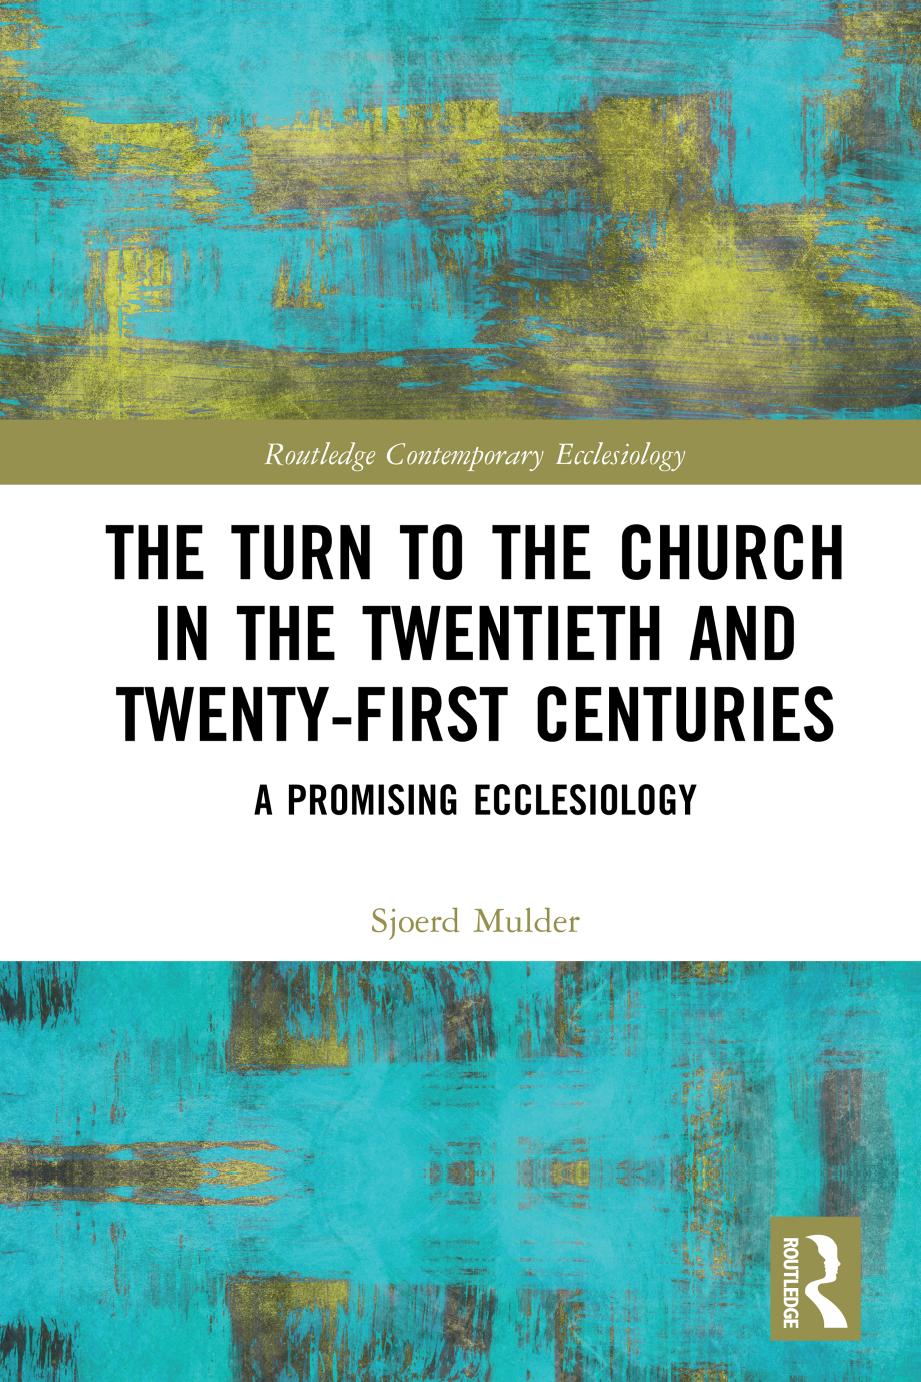 The Turn to the Church in the Twentieth and Twenty-First Centuries; A Promising Ecclesiology